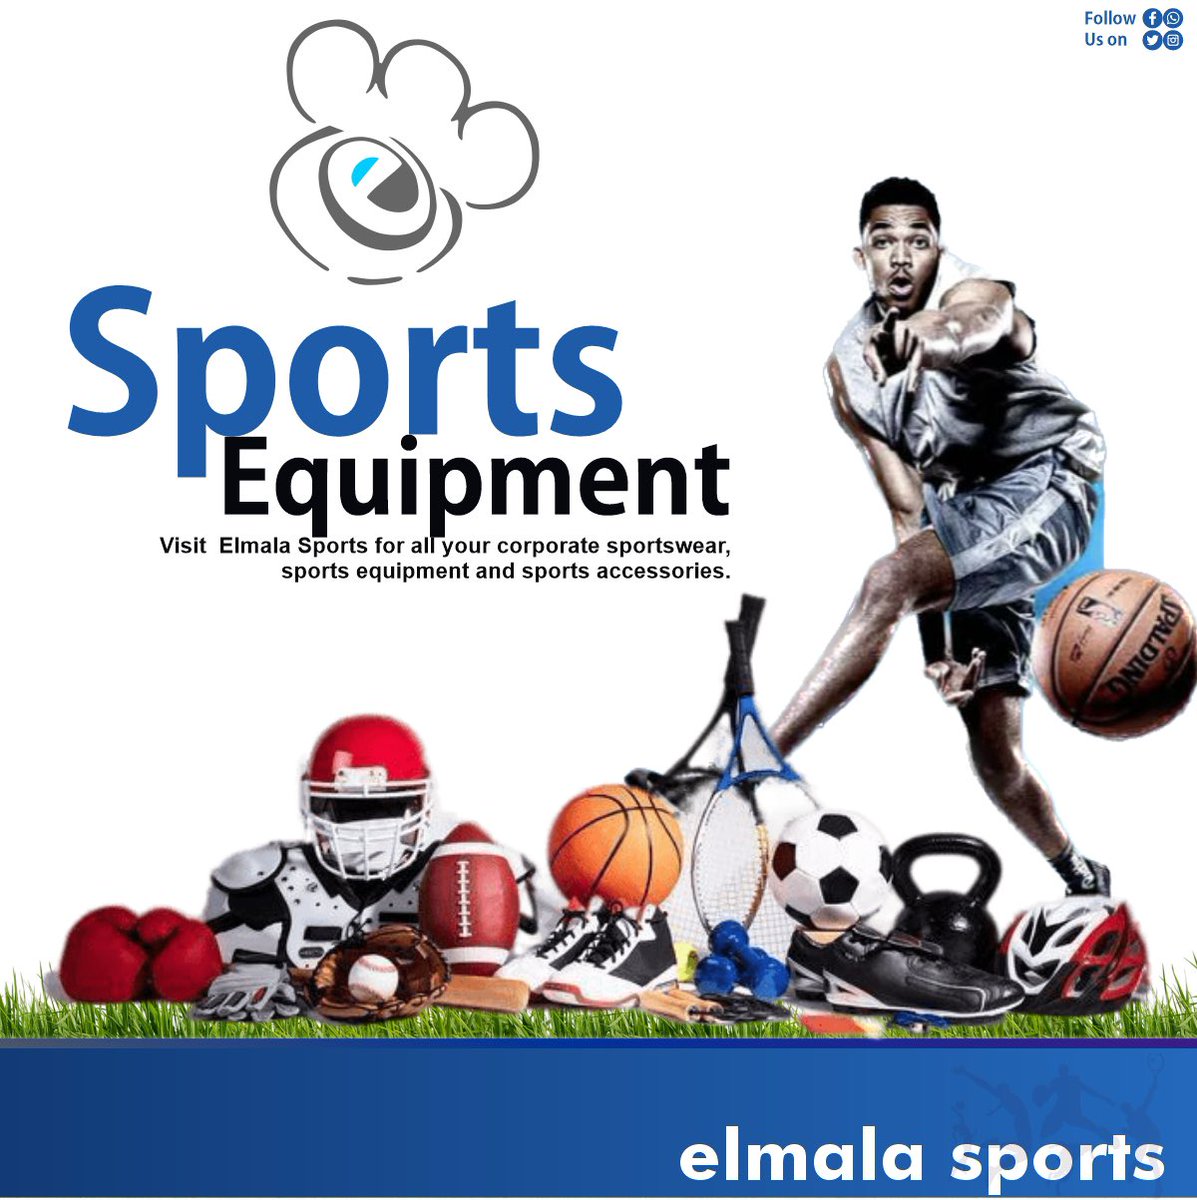 We have got everything you need at our sports shop.

#sportskit #buylocal #sportsaccessories #sportwearstore #harare #sportequipment #teamsports #sportsequipment #elmalasports #soccerballs #sportswearshop #fortheloveofthegame